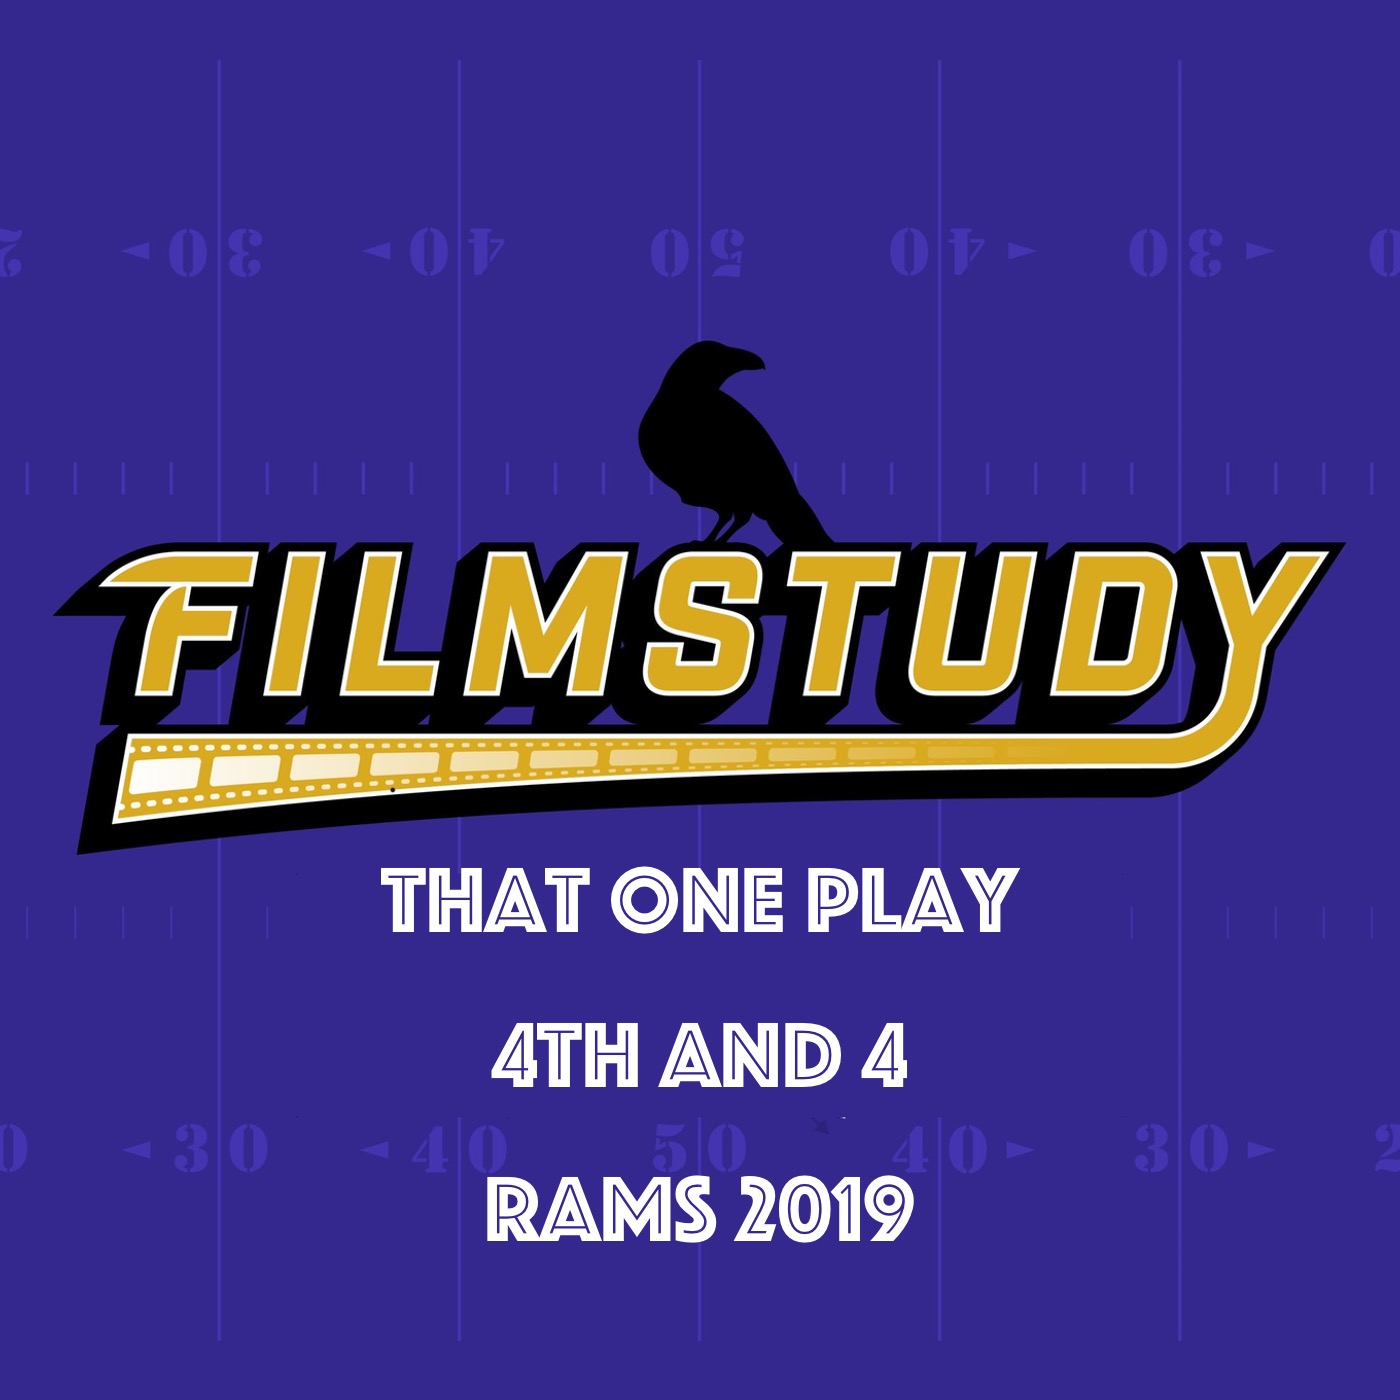 TOP : 4th and 4 Rams 2019